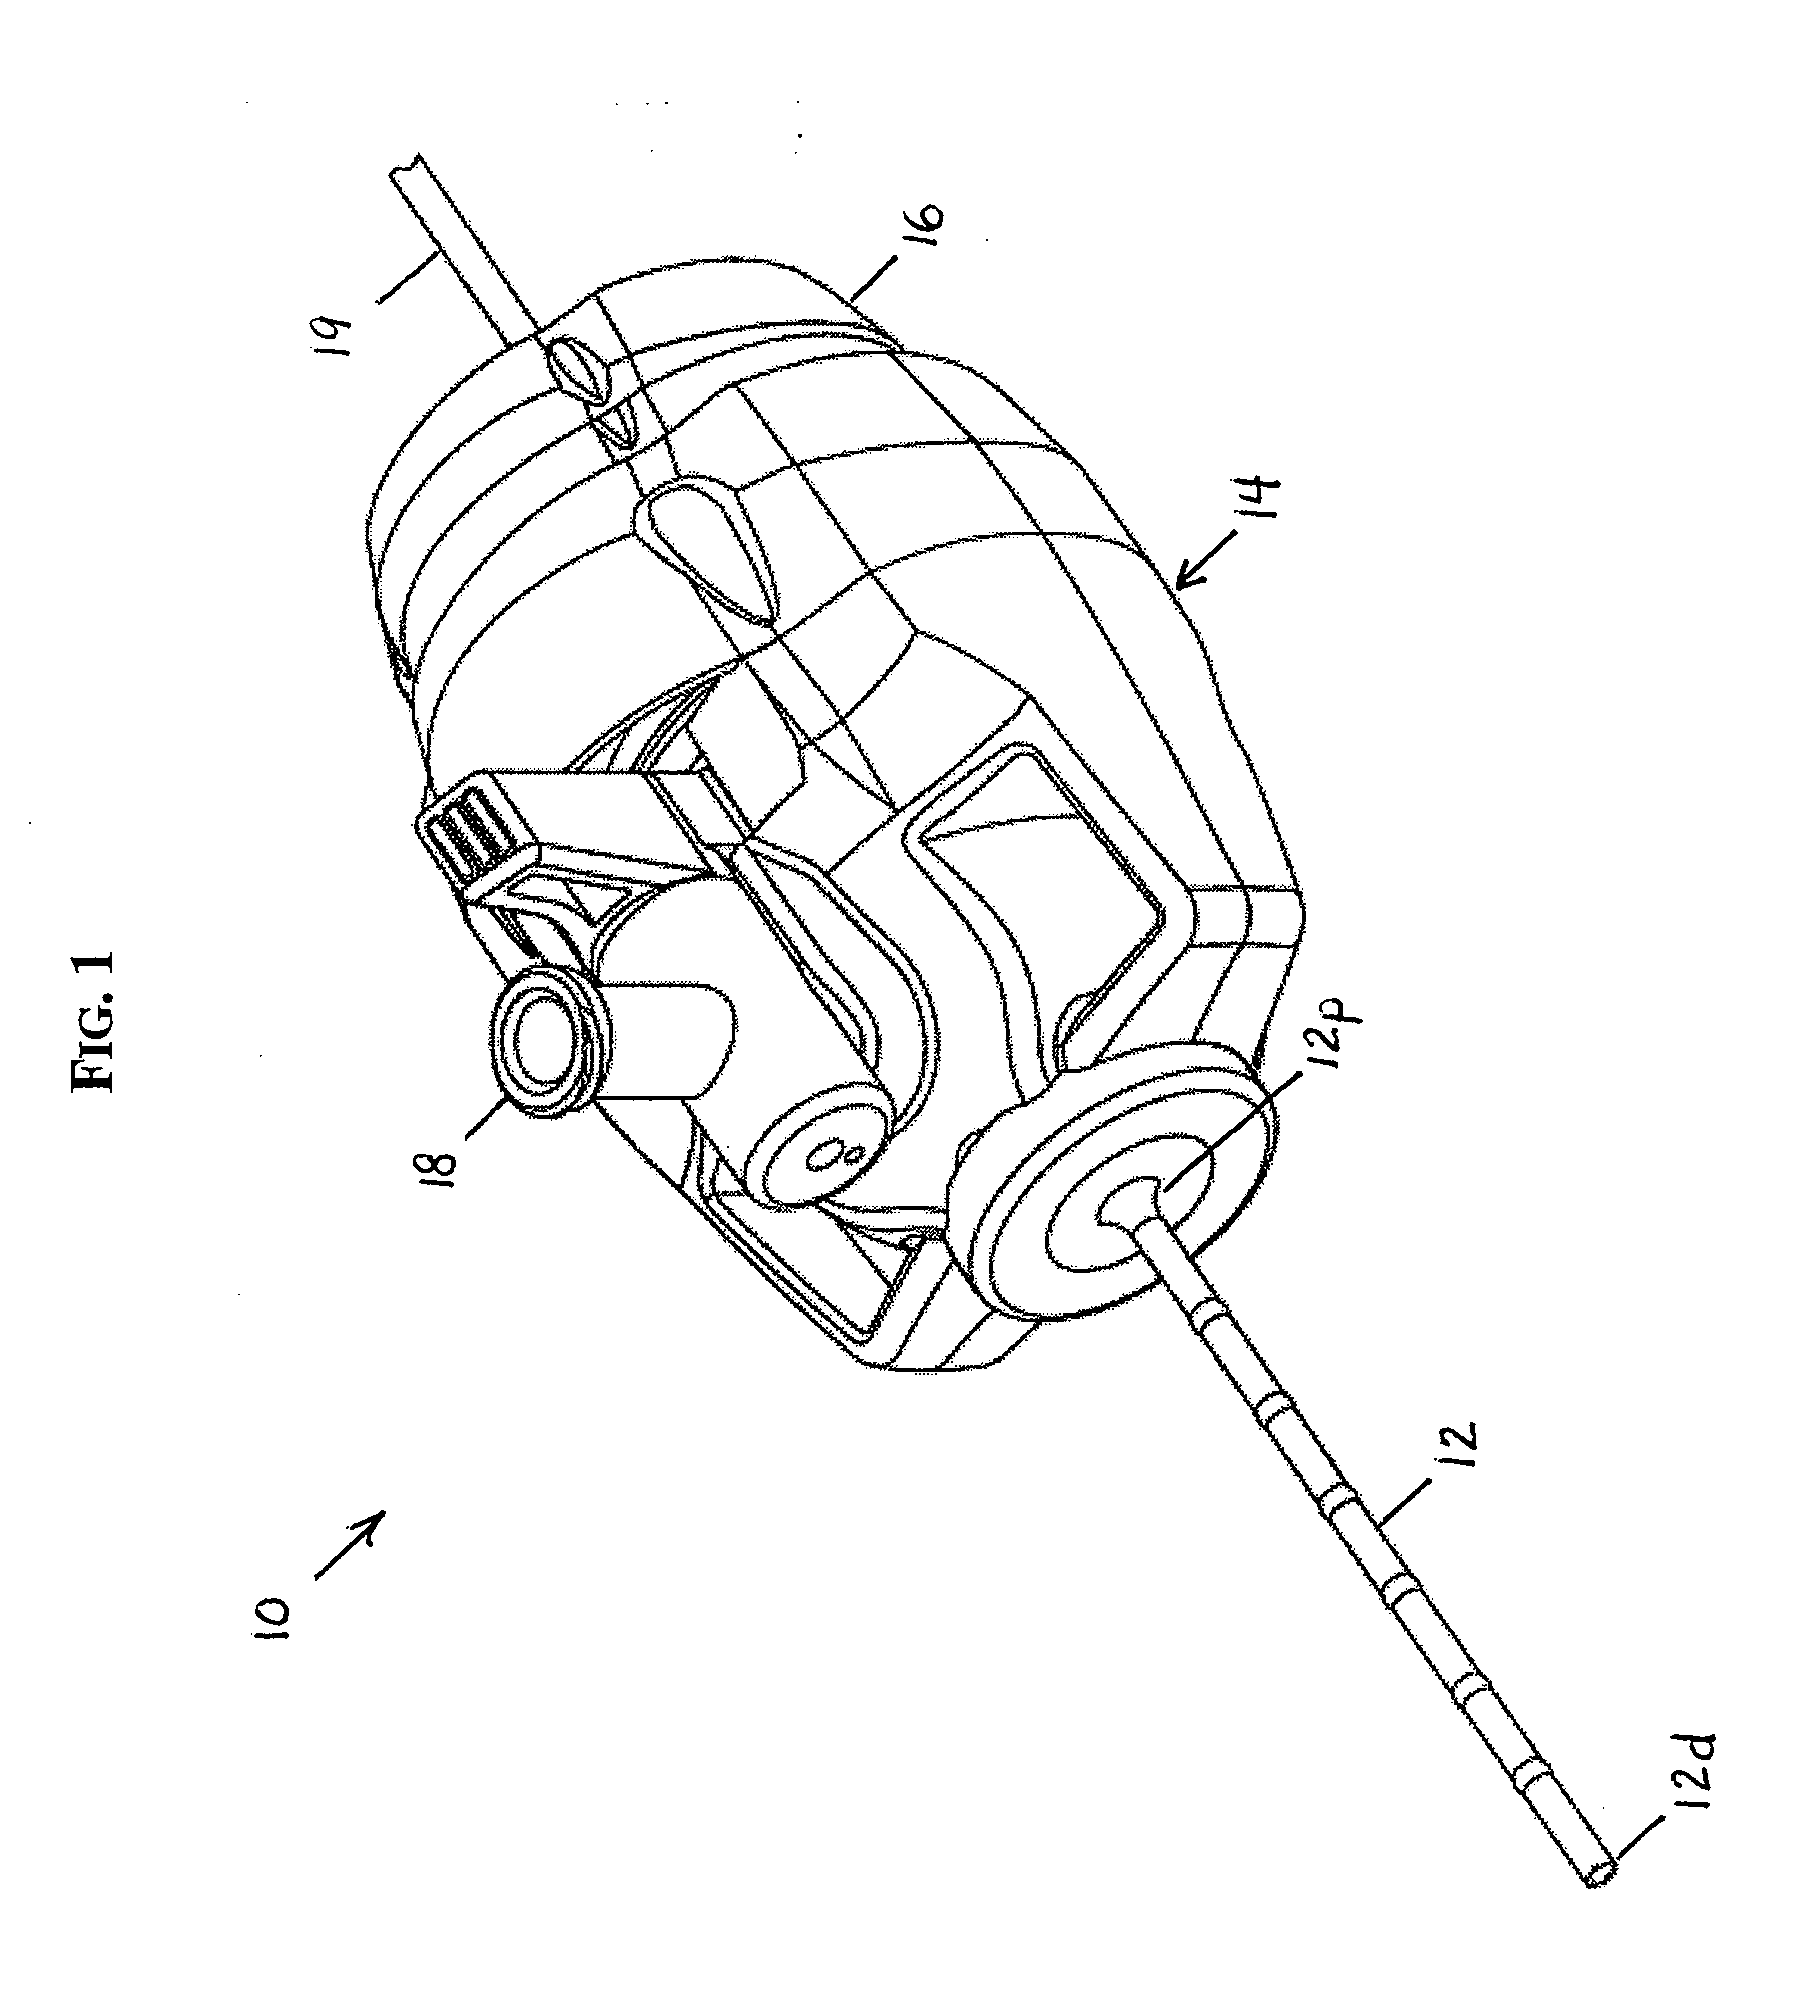 Flexible cannula devices and methods